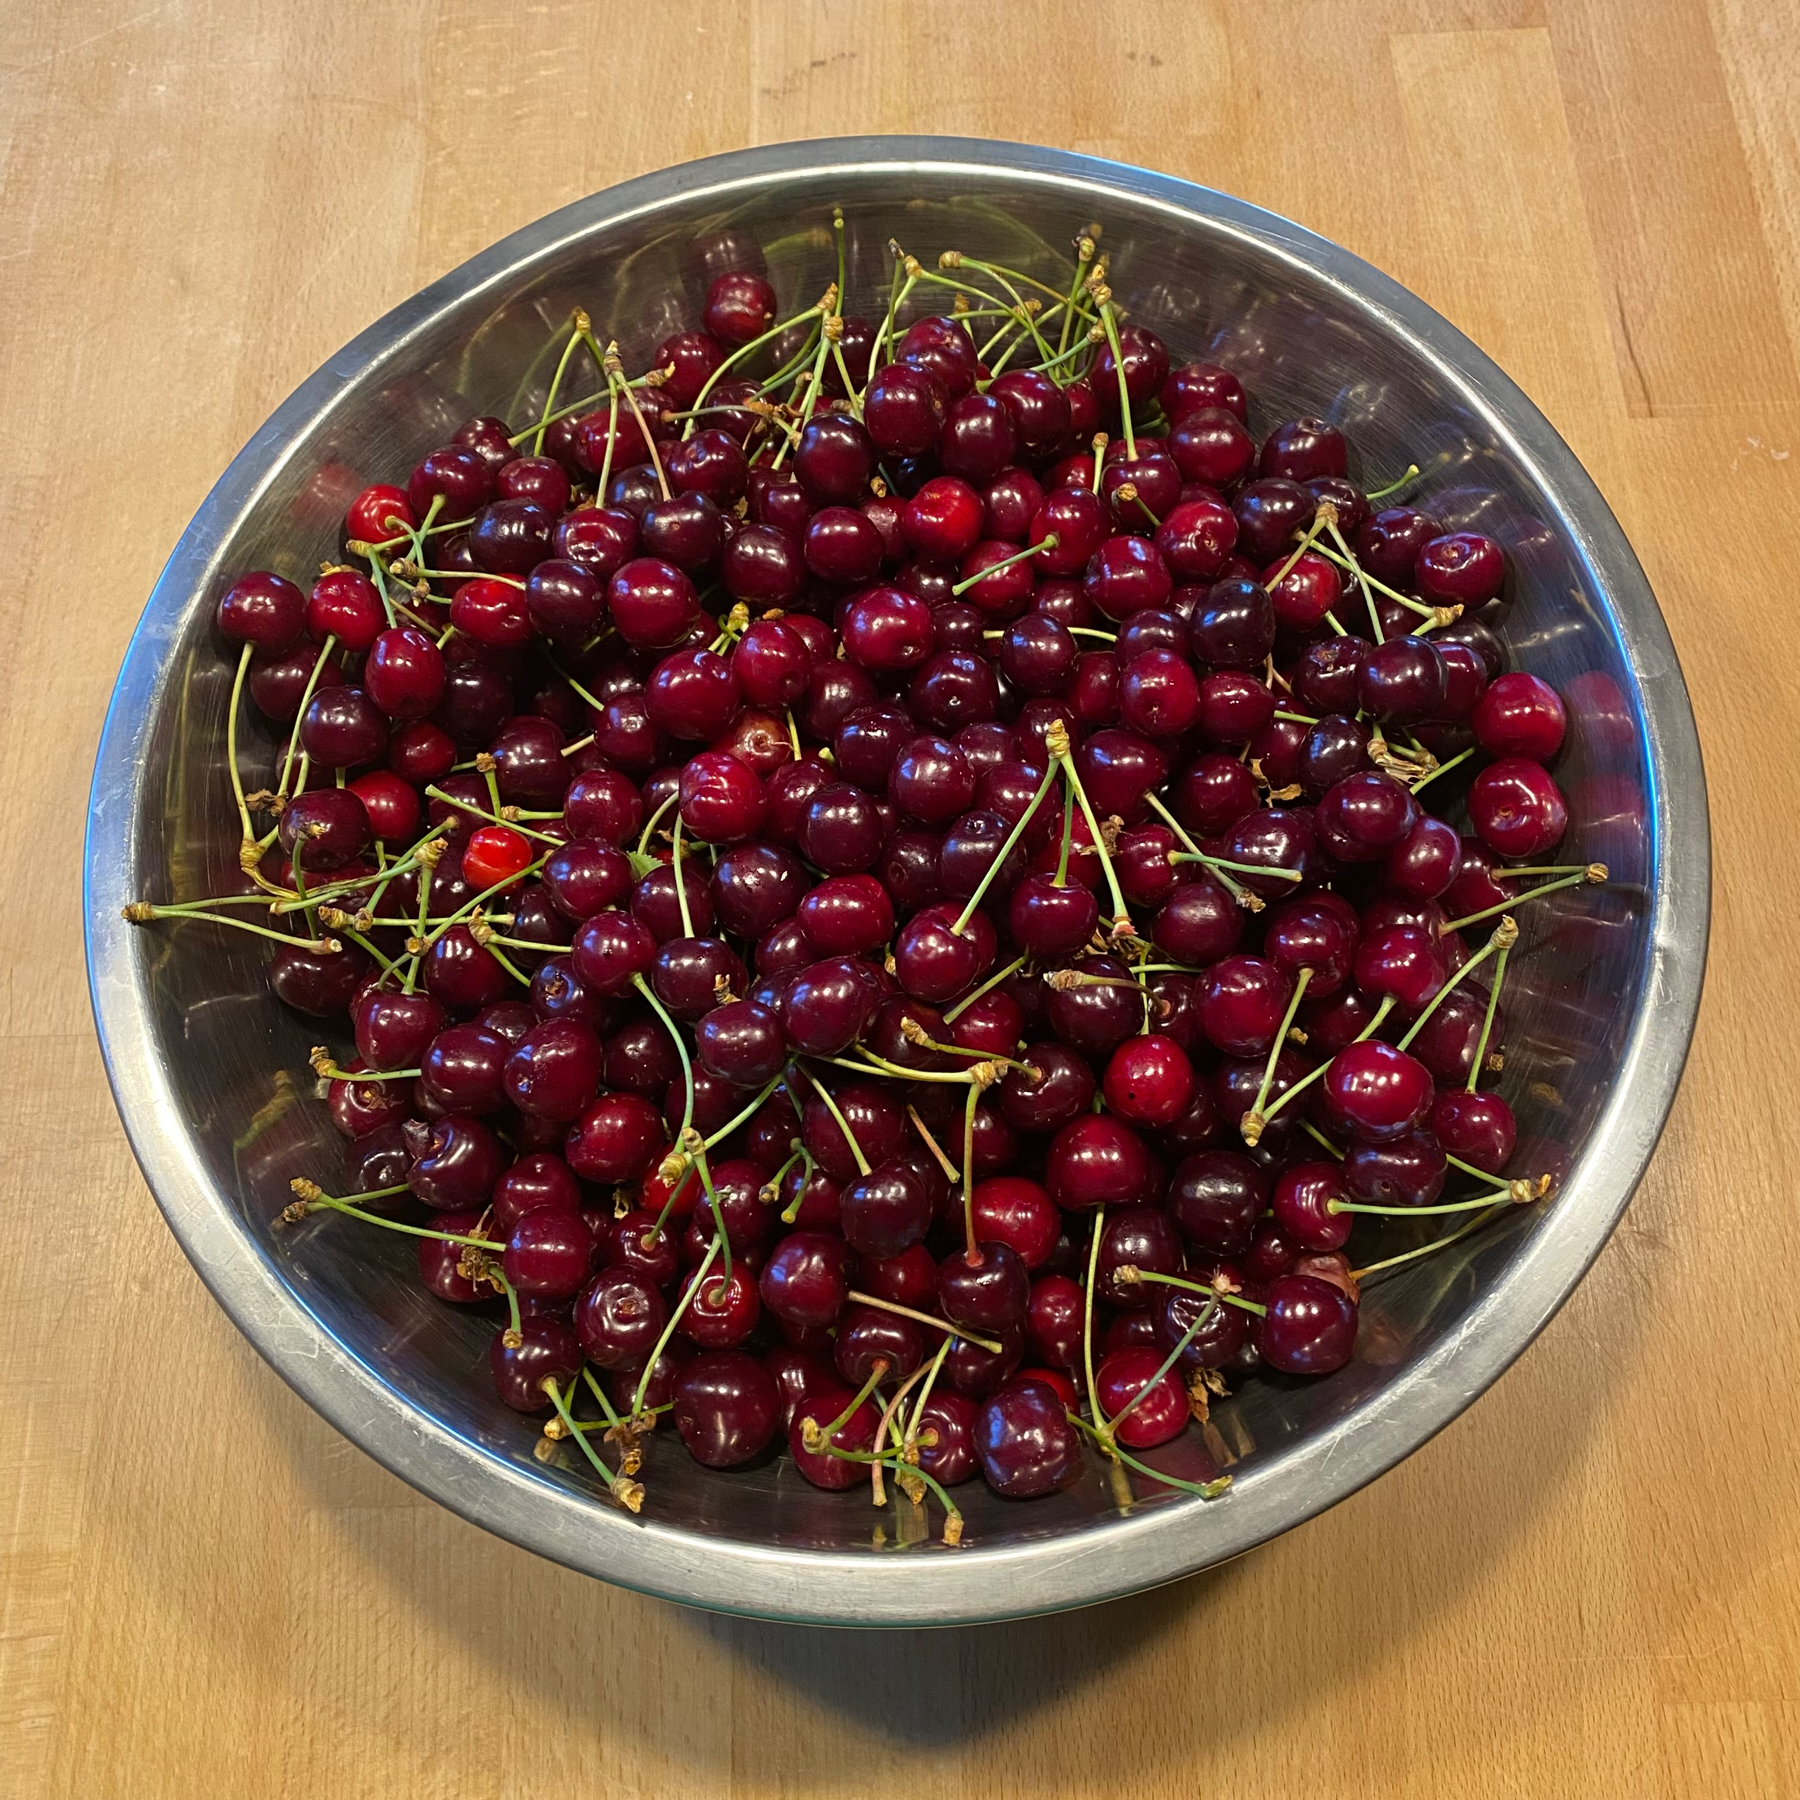 a bowl of deeply red cherries